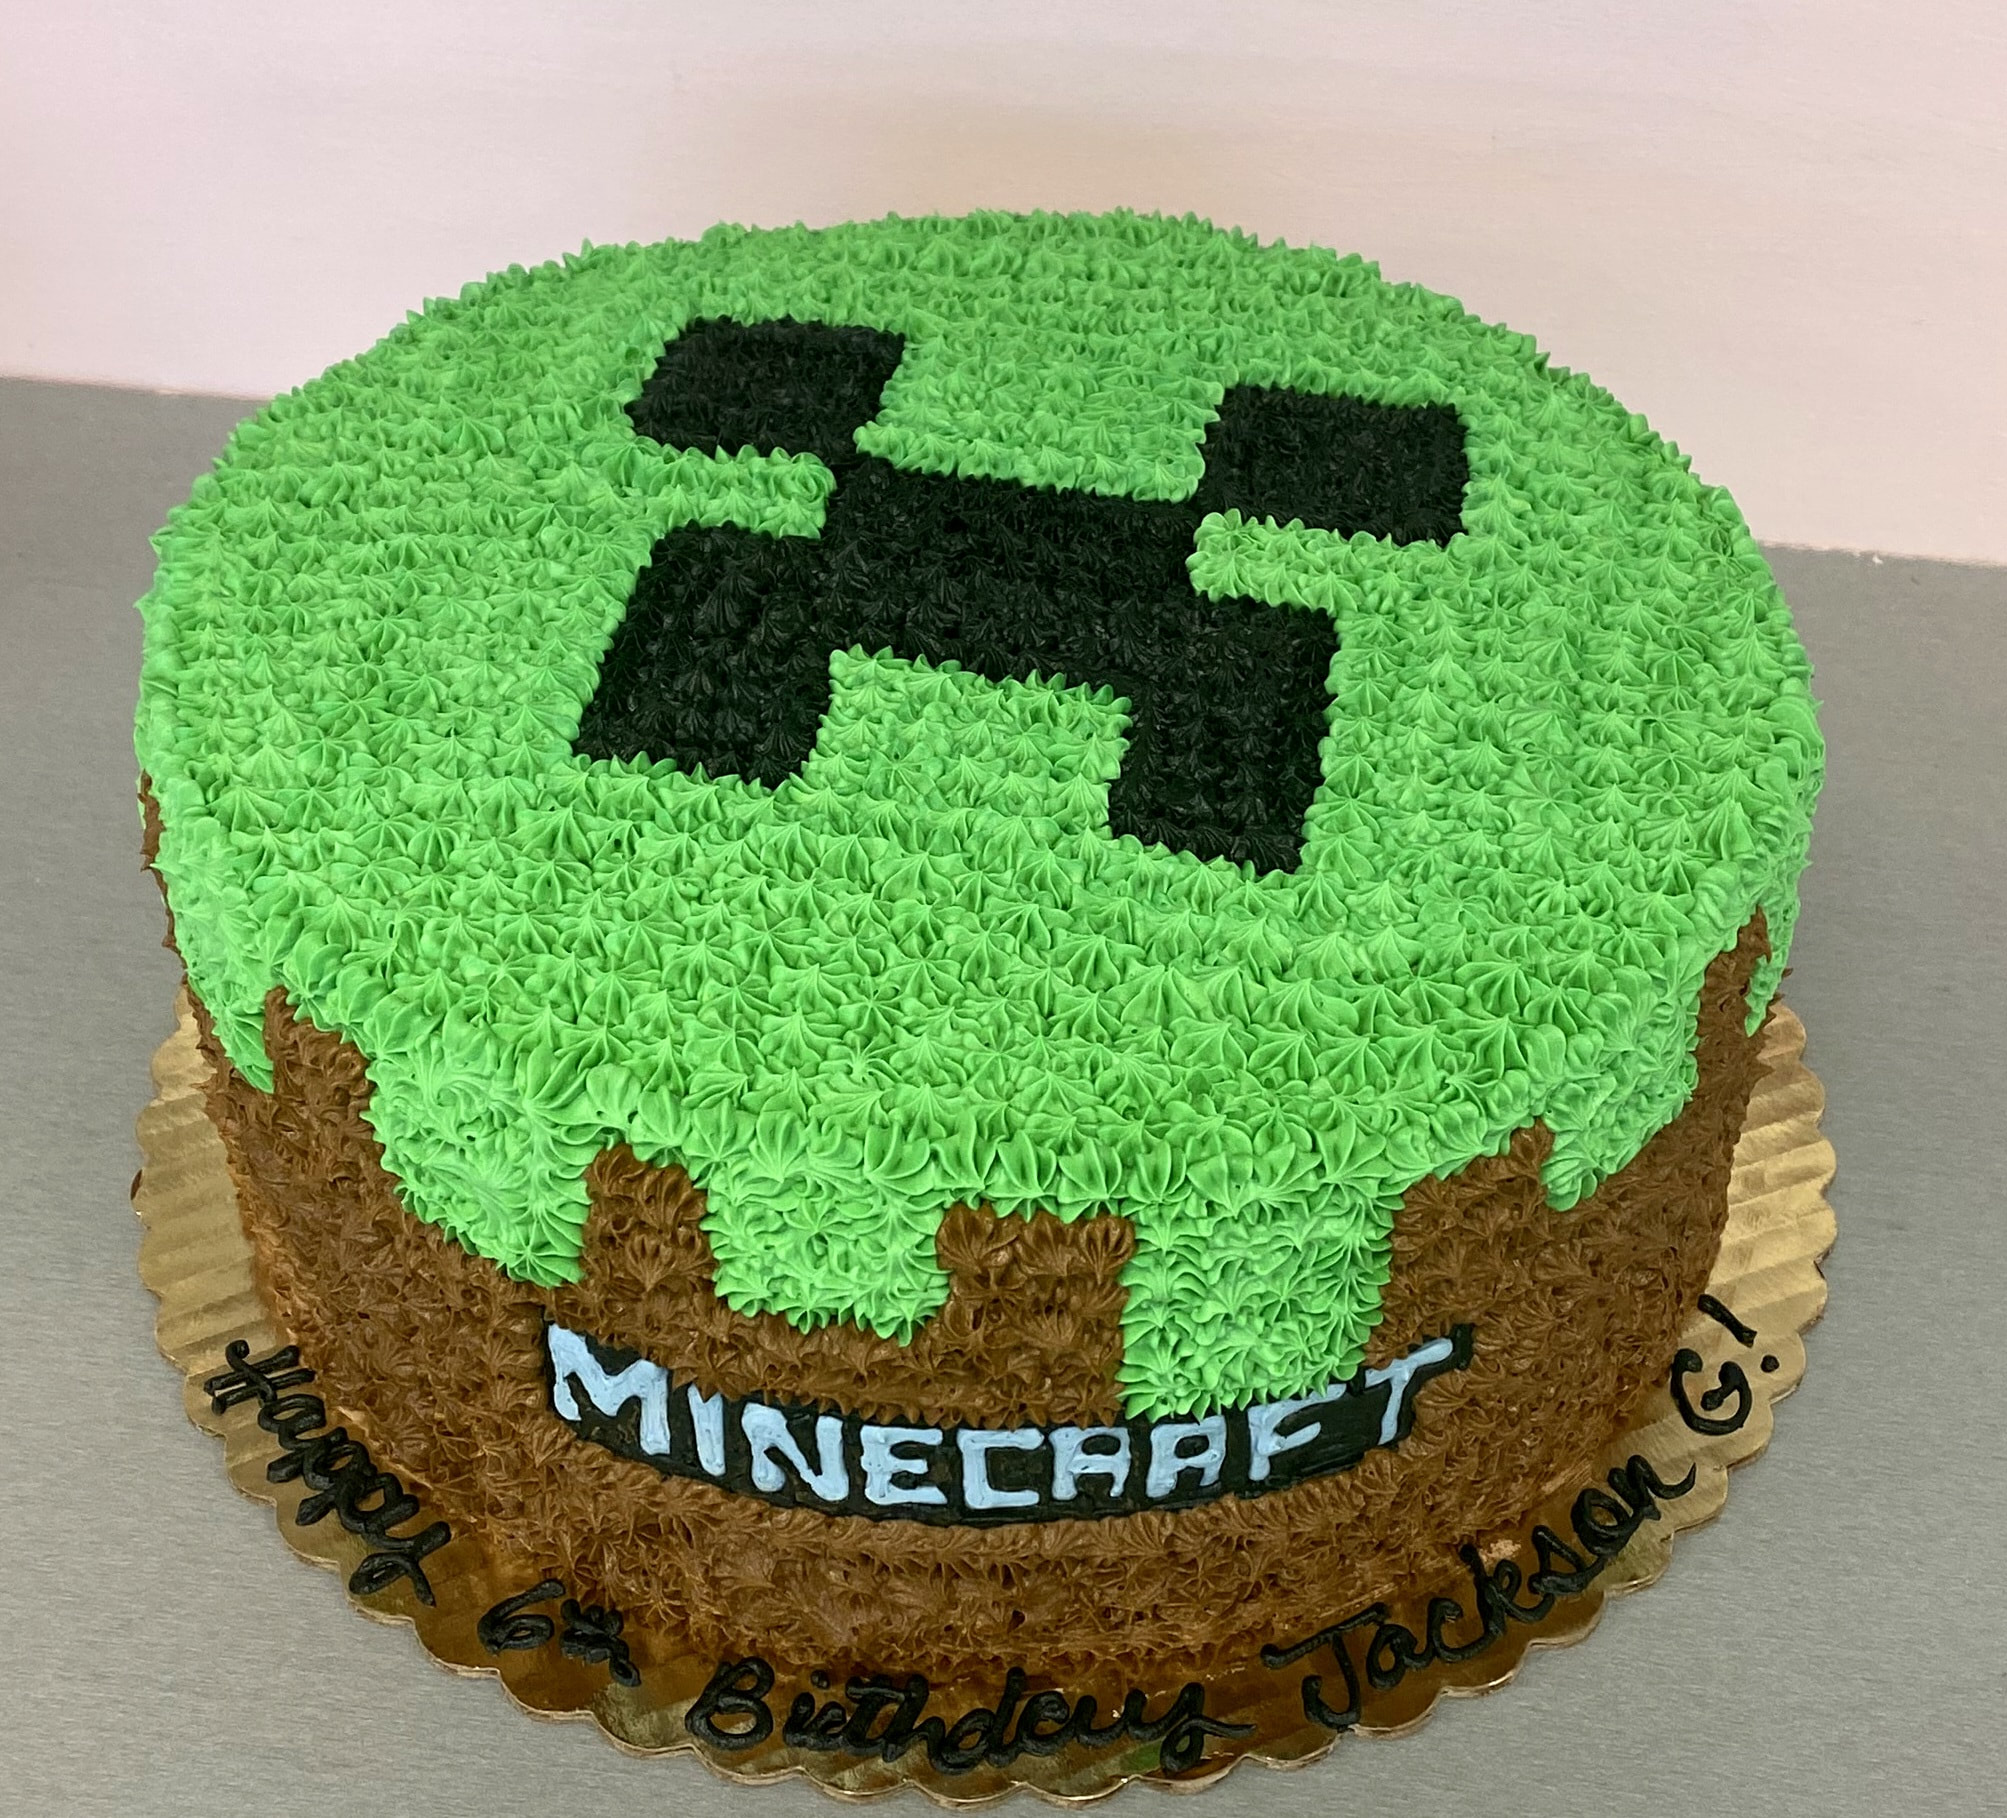 My son wanted a lego Minecraft cake for his birthday. : r/cakedecorating